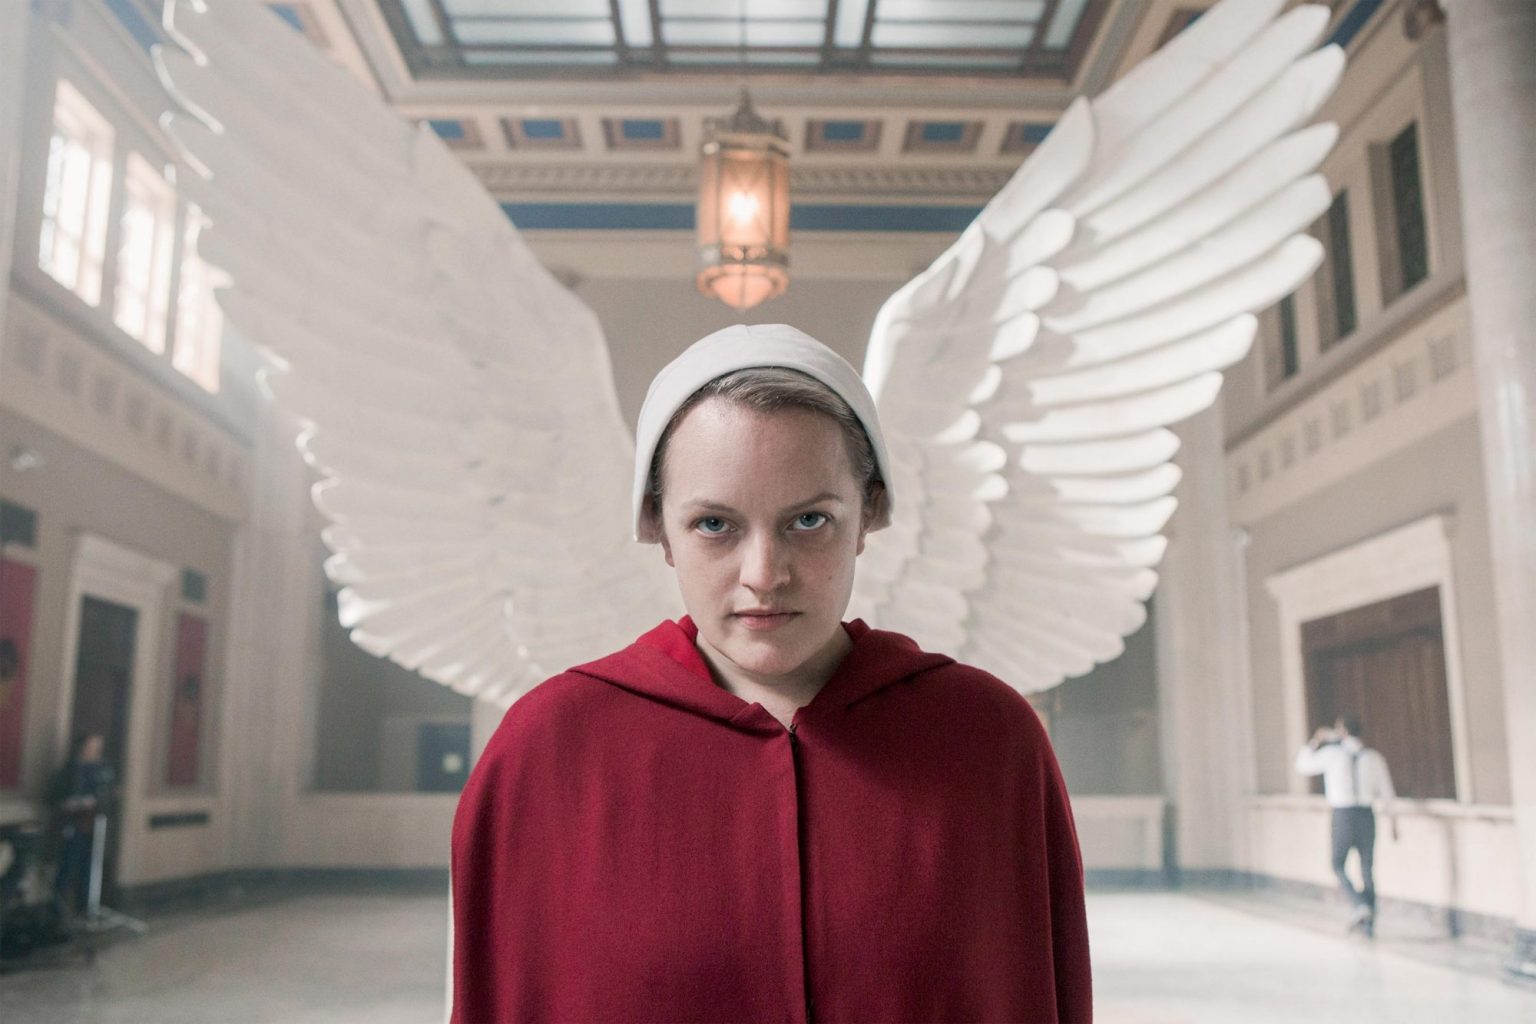 Handmaid's Tale McKenna Grace To Appear As Commander's Wife The